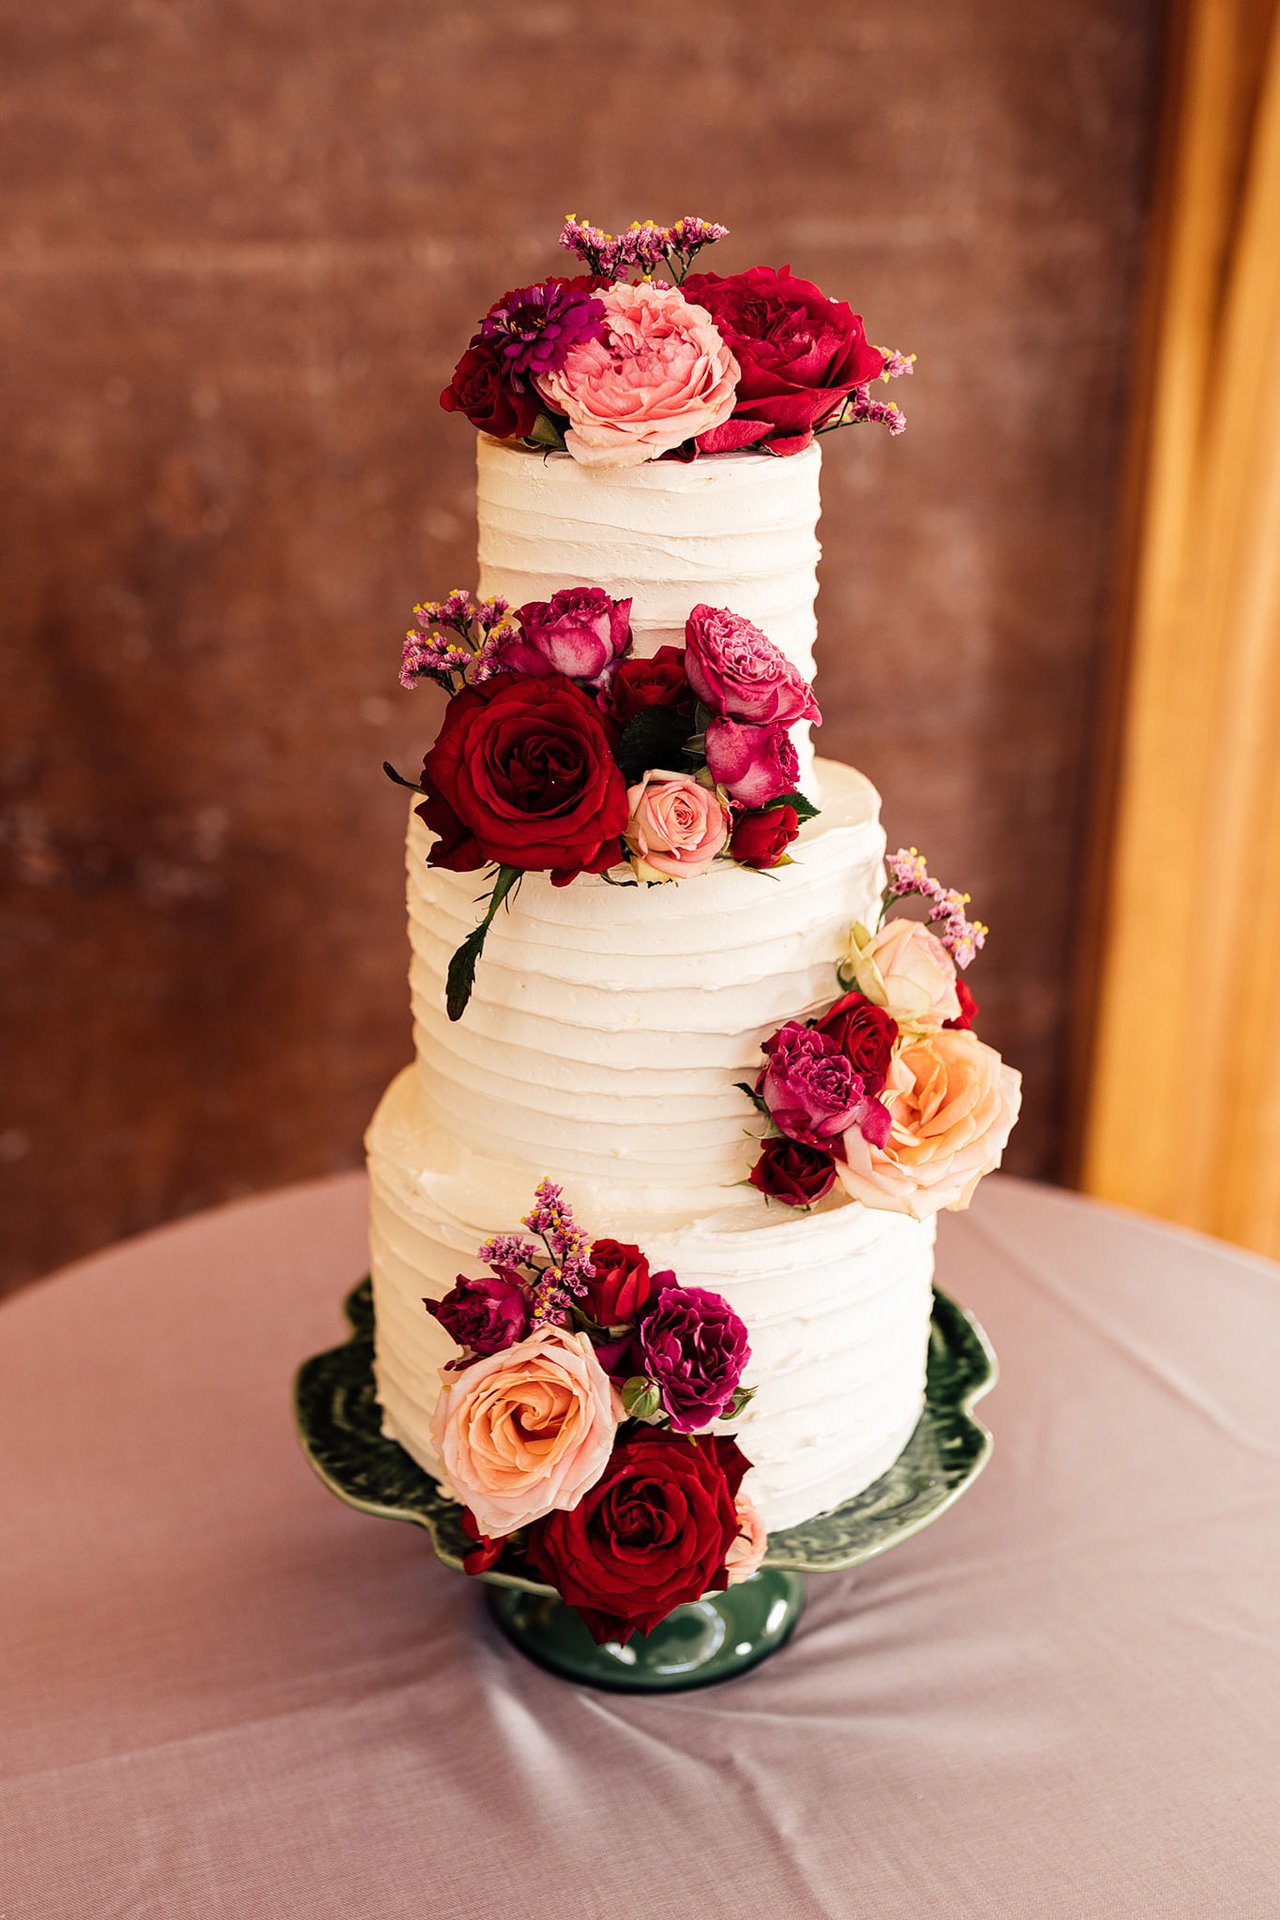 Three tier white wedding cake with real pink and red flowers for fun party wedding reception at cotswolds venue elmore court